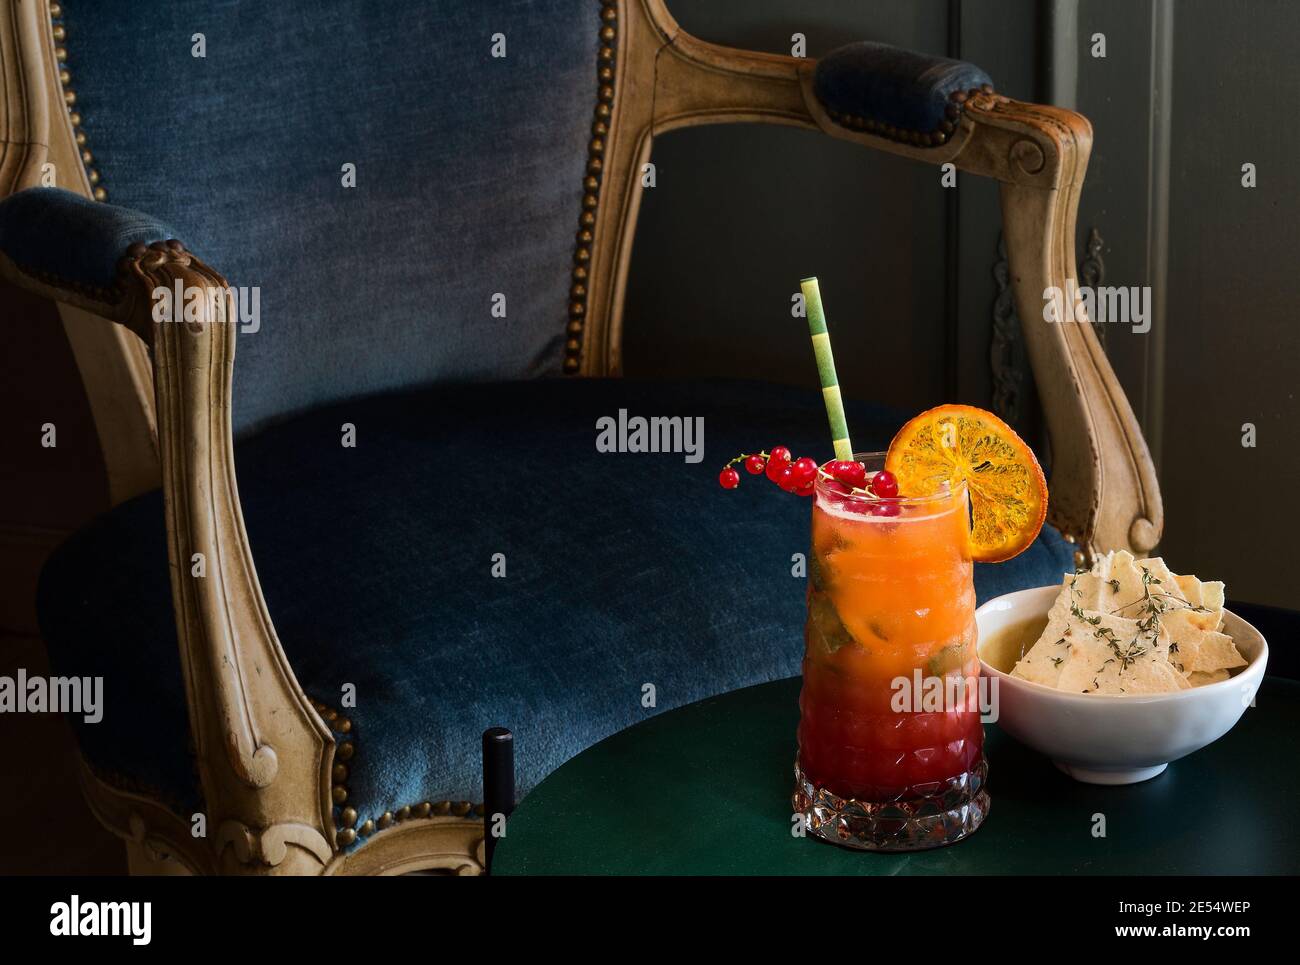 Cocktail juice with blue velvet chair Stock Photo